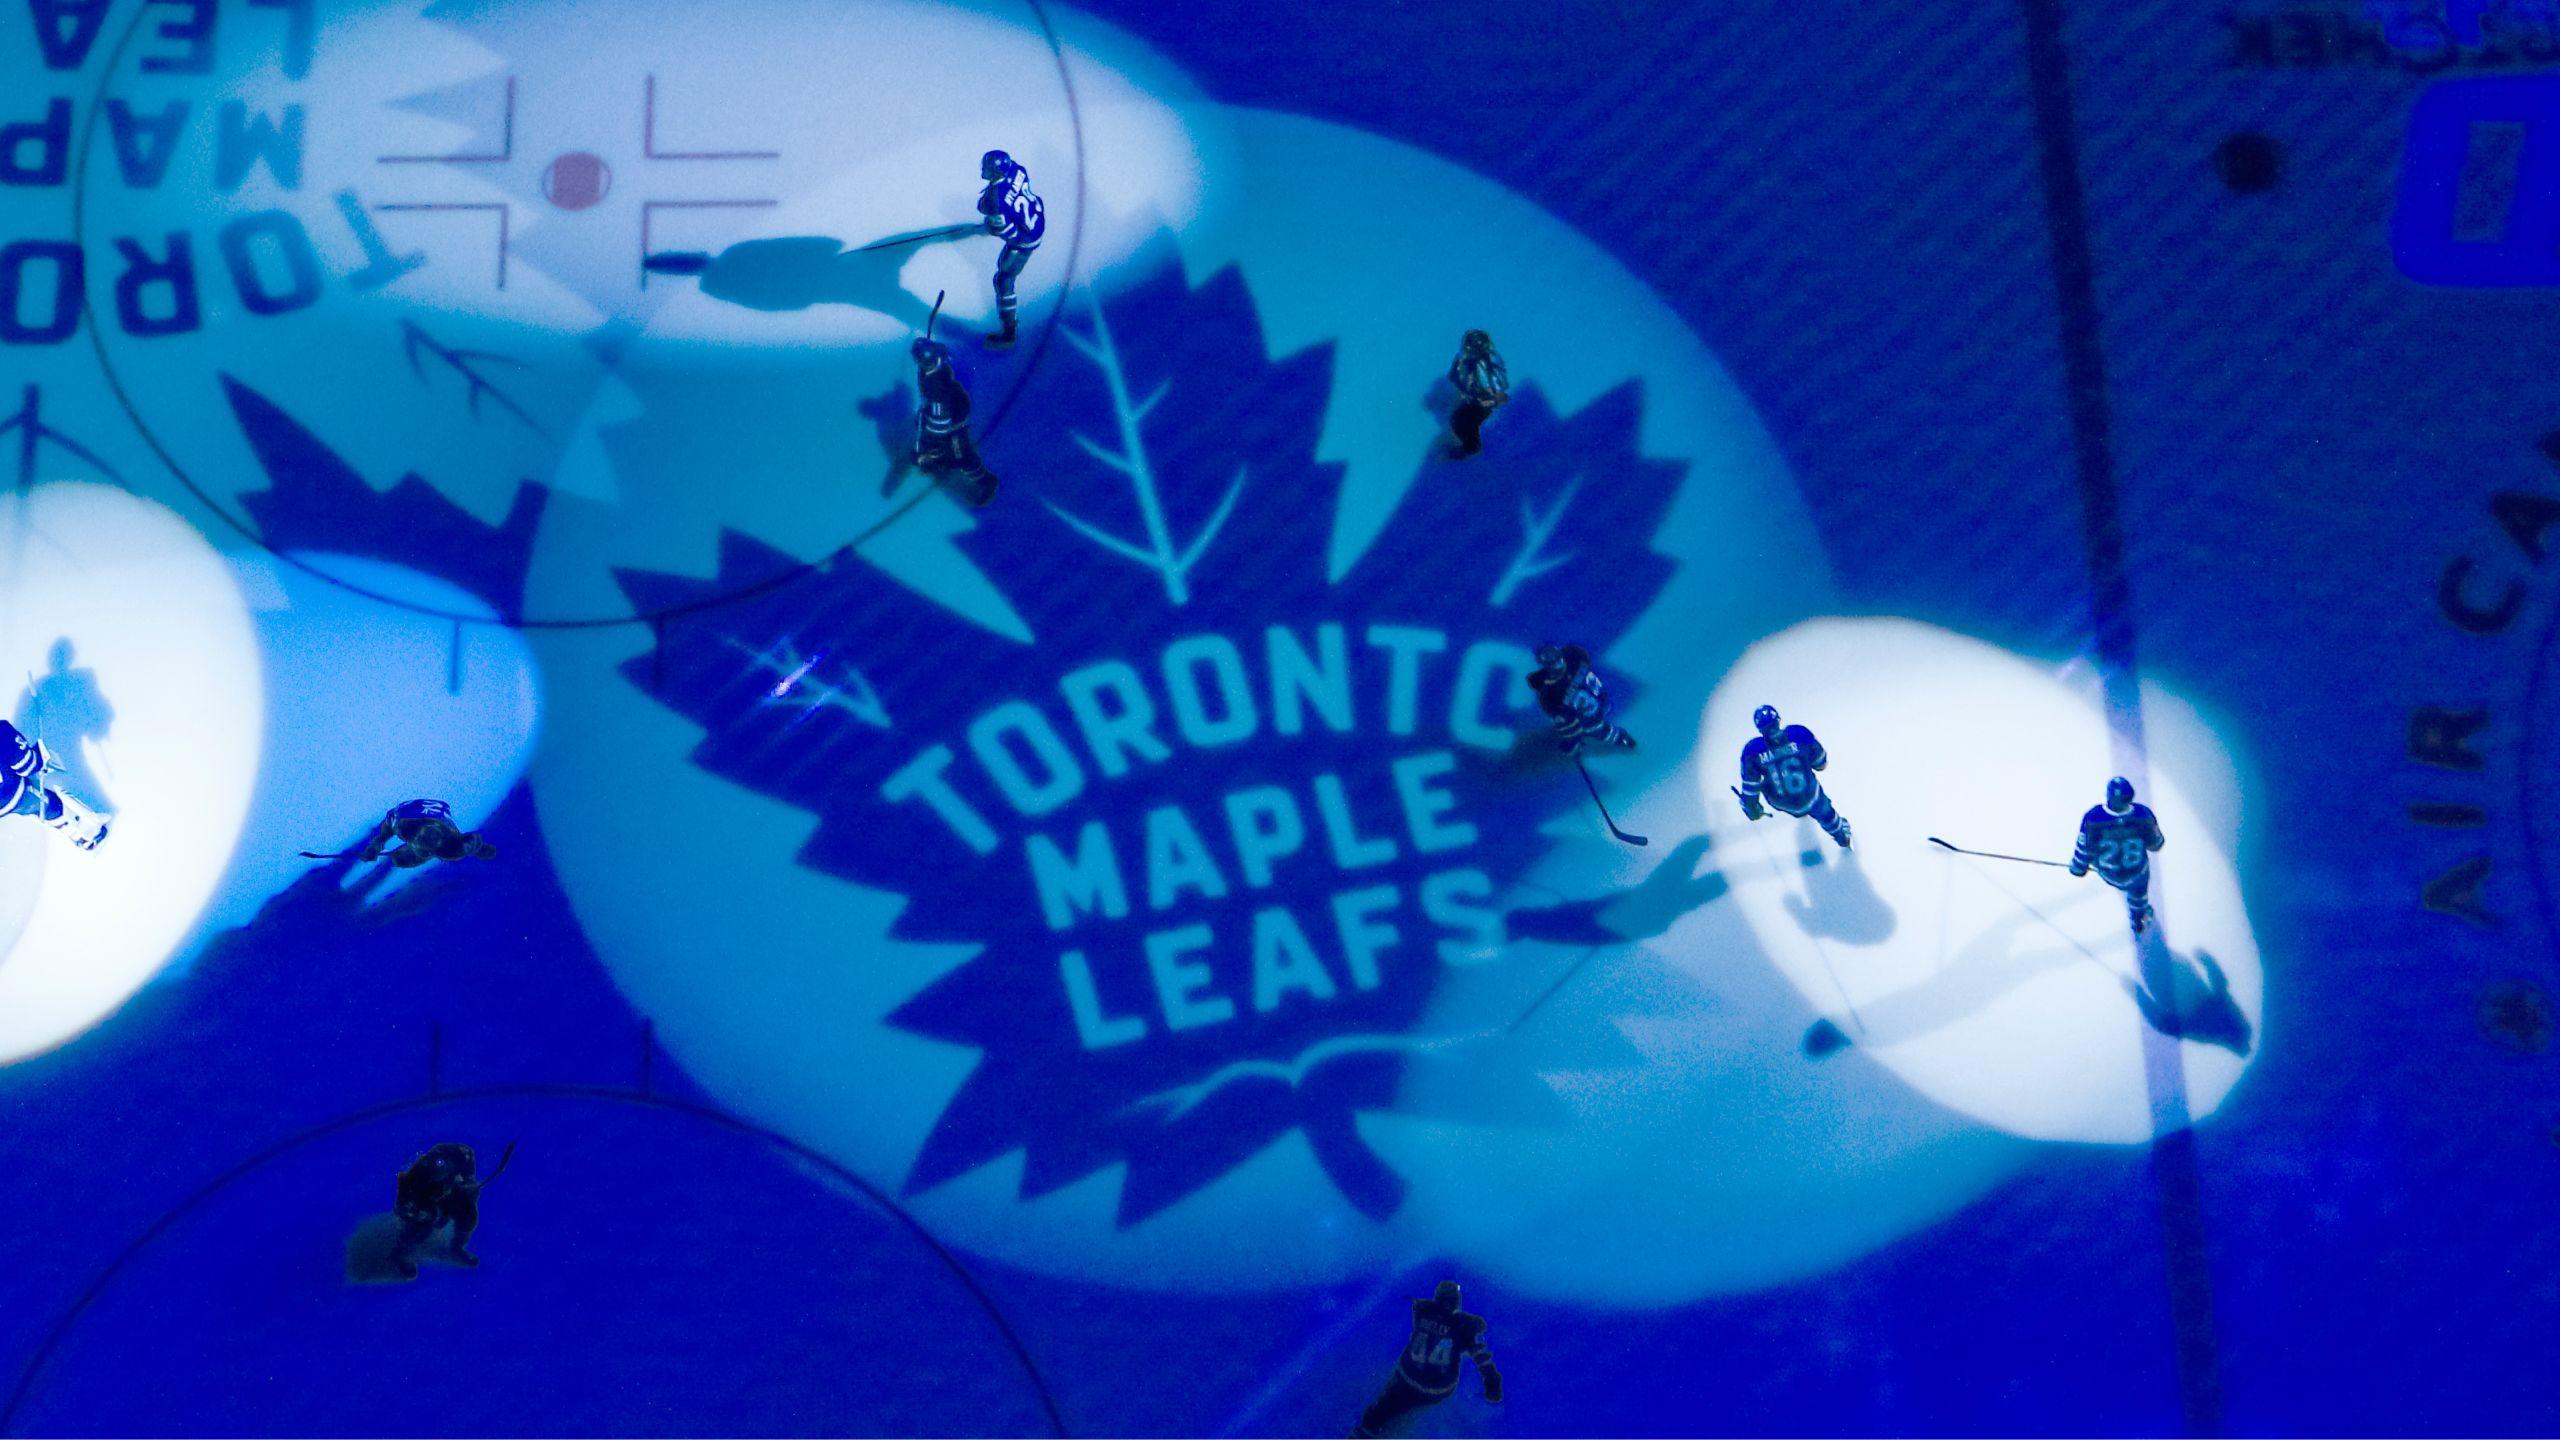 The Story Behind the Toronto Maple Leafs' Adoption of Canada's